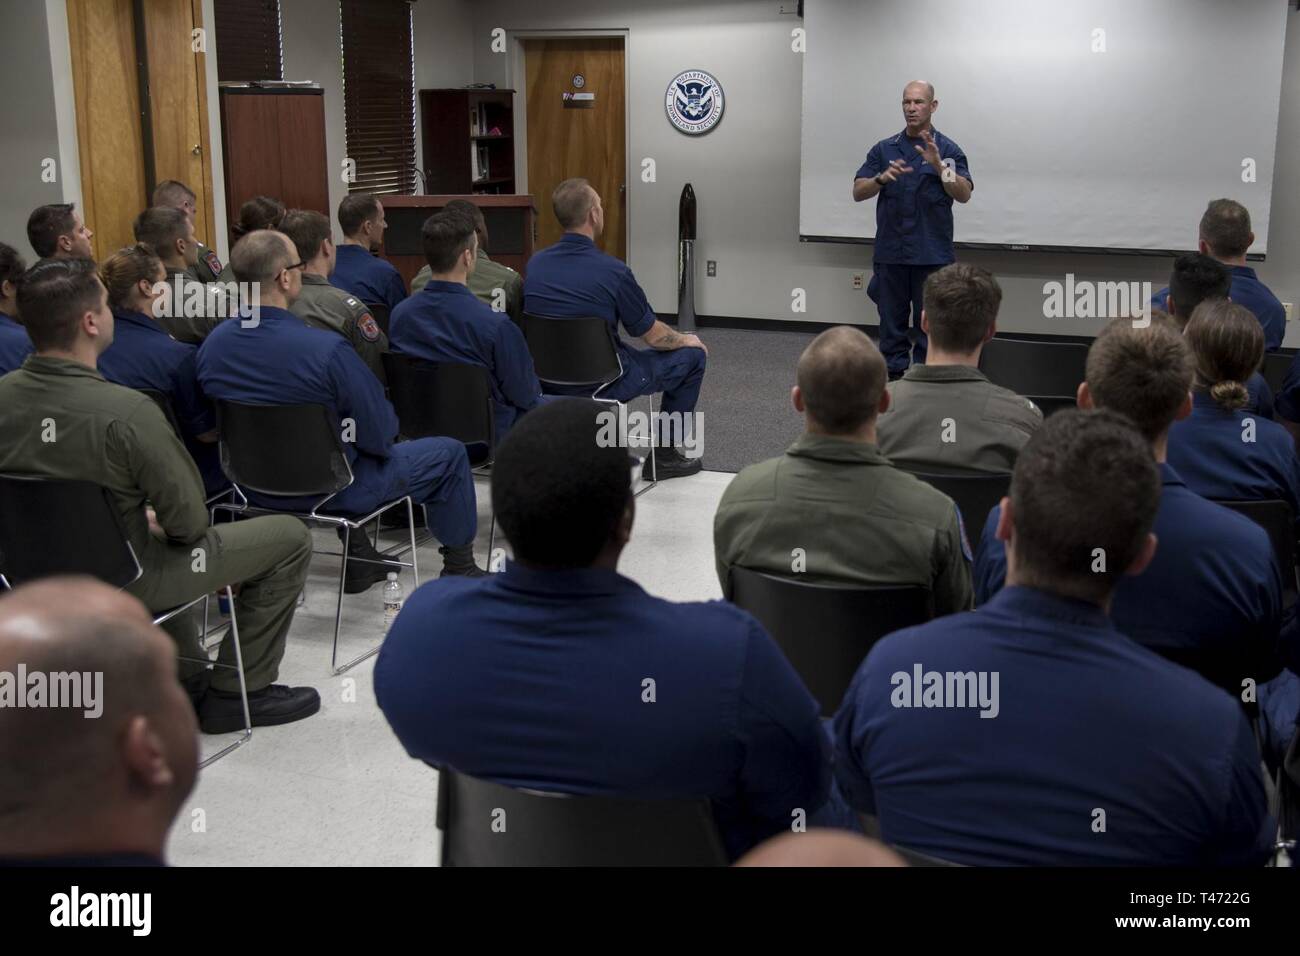 Adm. Charles W. Ray, vice commandant of the Coast Guard, speaks to Coast Guard members during a unit visit at Coast Guard Air Station New Orleans, Thursday, March 14, 2019. Air Station New Orleans supports a wide range of Coast Guard operations to include search and rescue, law enforcement, port security and marine environmental protection. Coast Guard Stock Photo